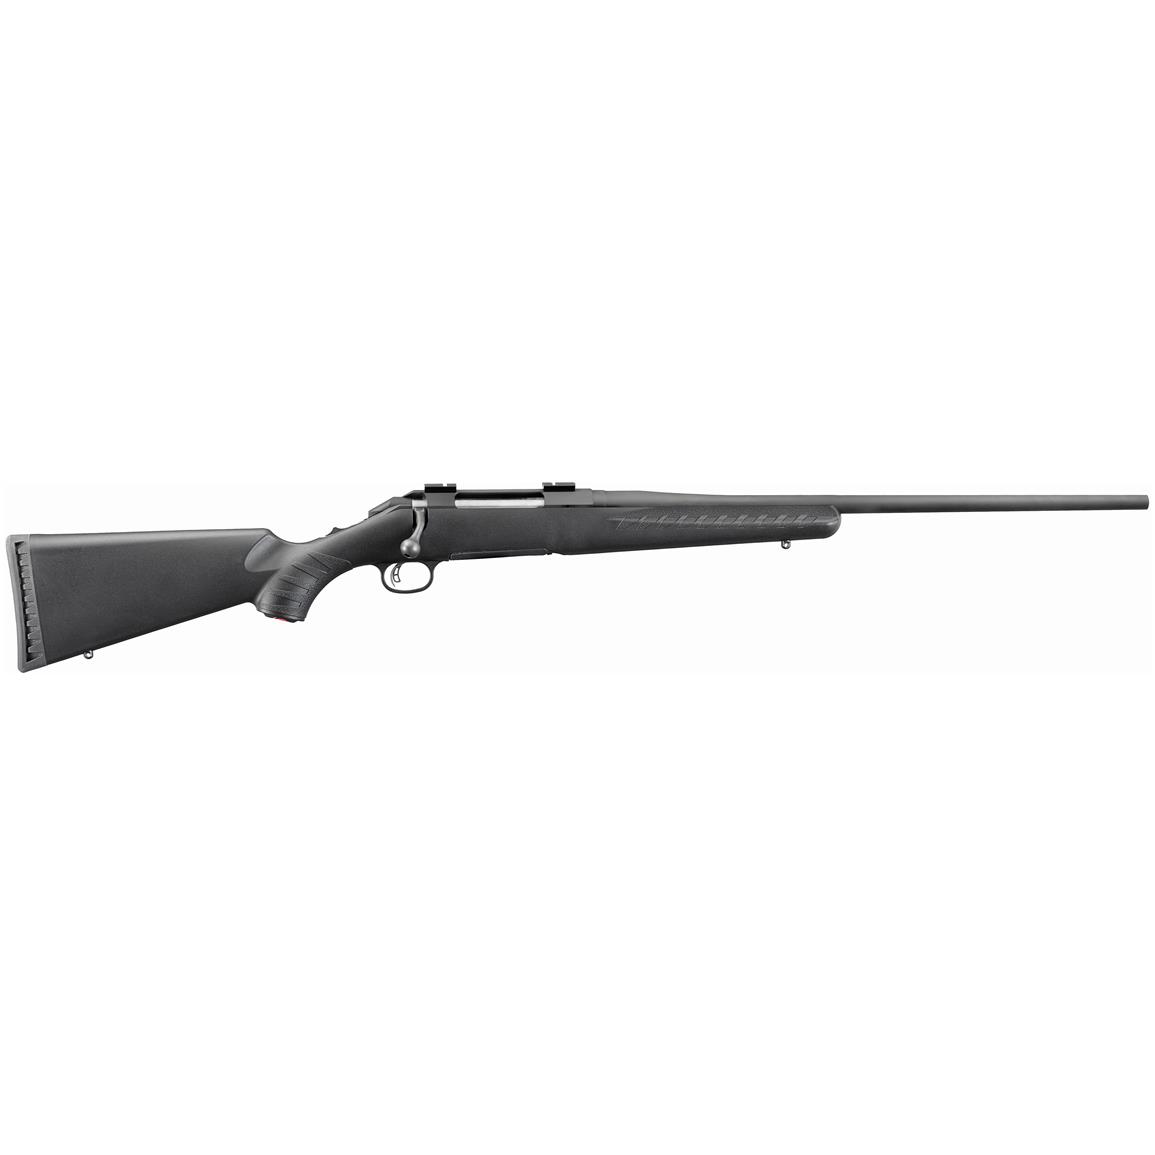 Ruger American Rifle, Bolt Action, .308 Winchester, 22" Barrel, 4+1 Rounds